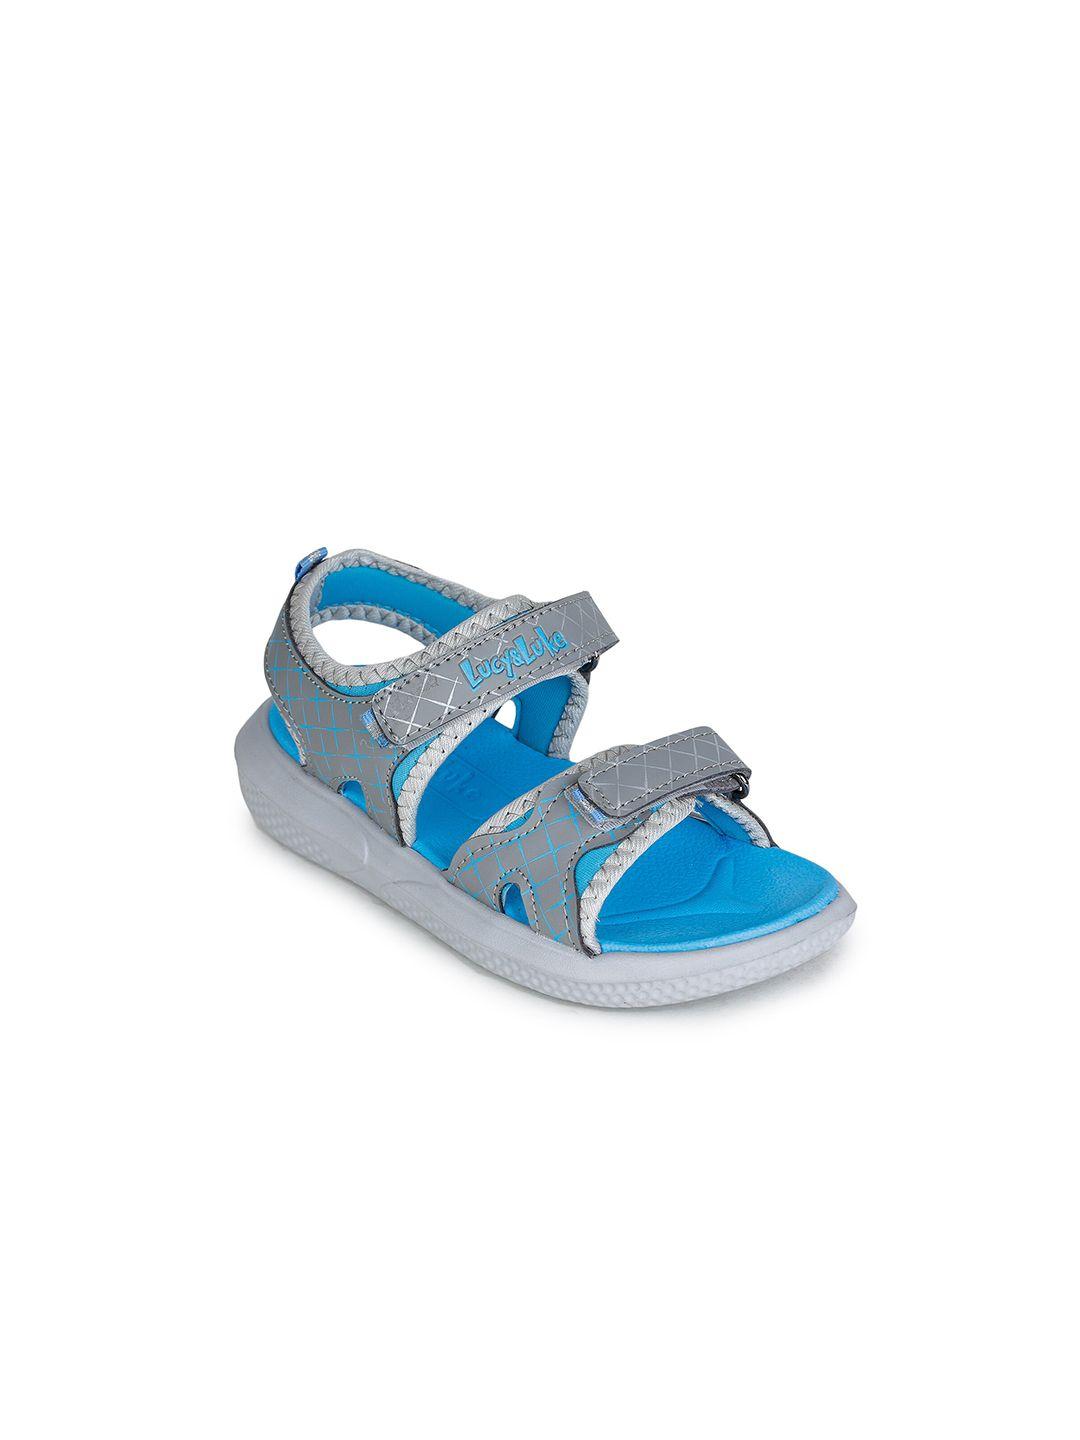 liberty-kids-grey-&-blue-printed-casual-sports-sandals